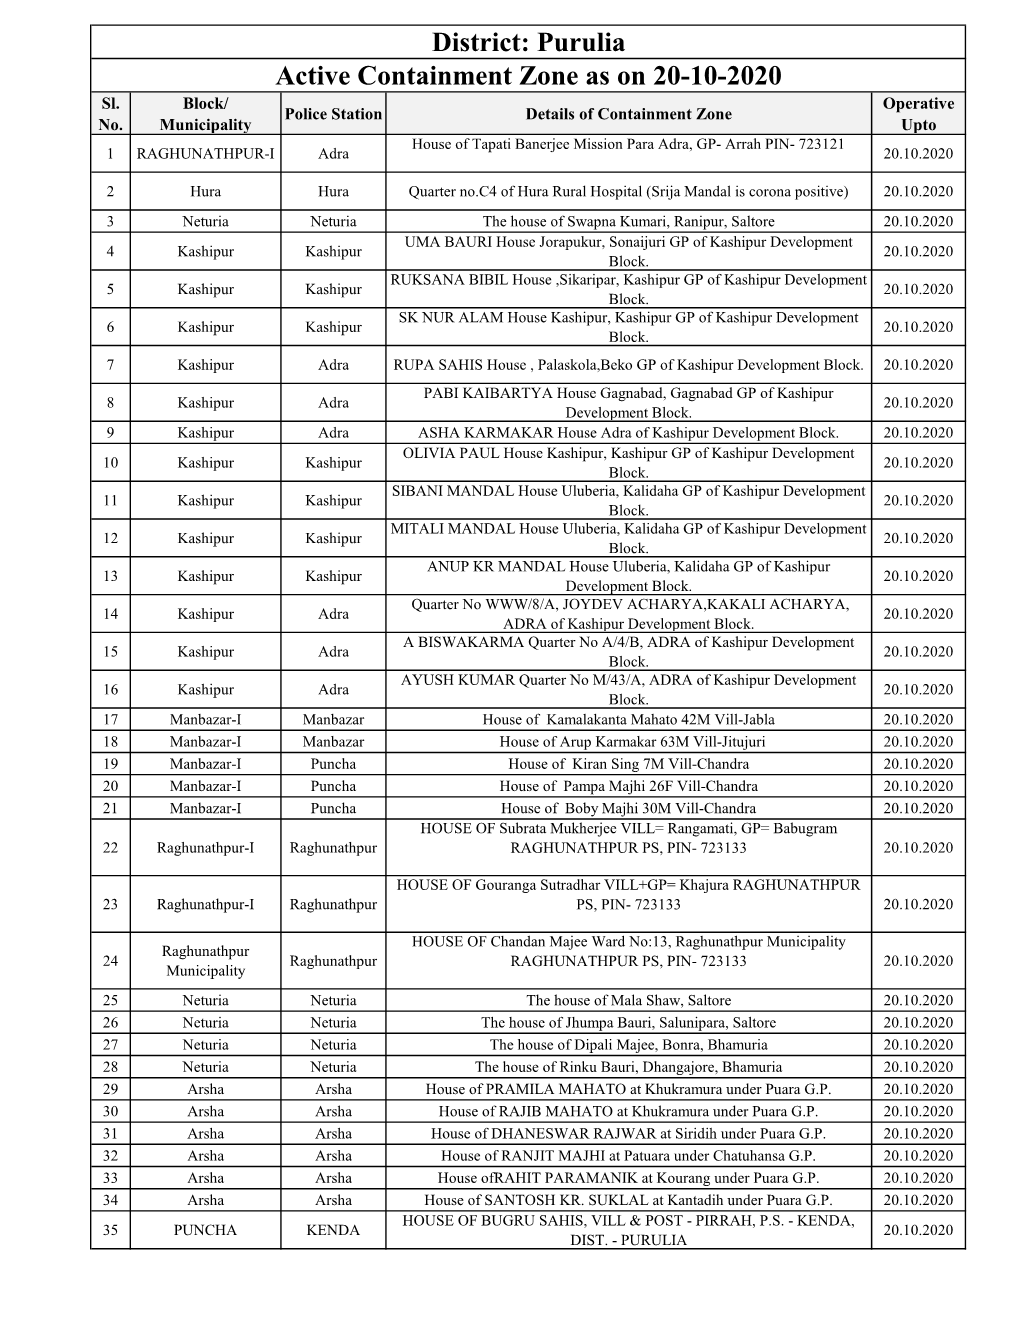 Active Containment Zone As on 20-10-2020 District: Purulia